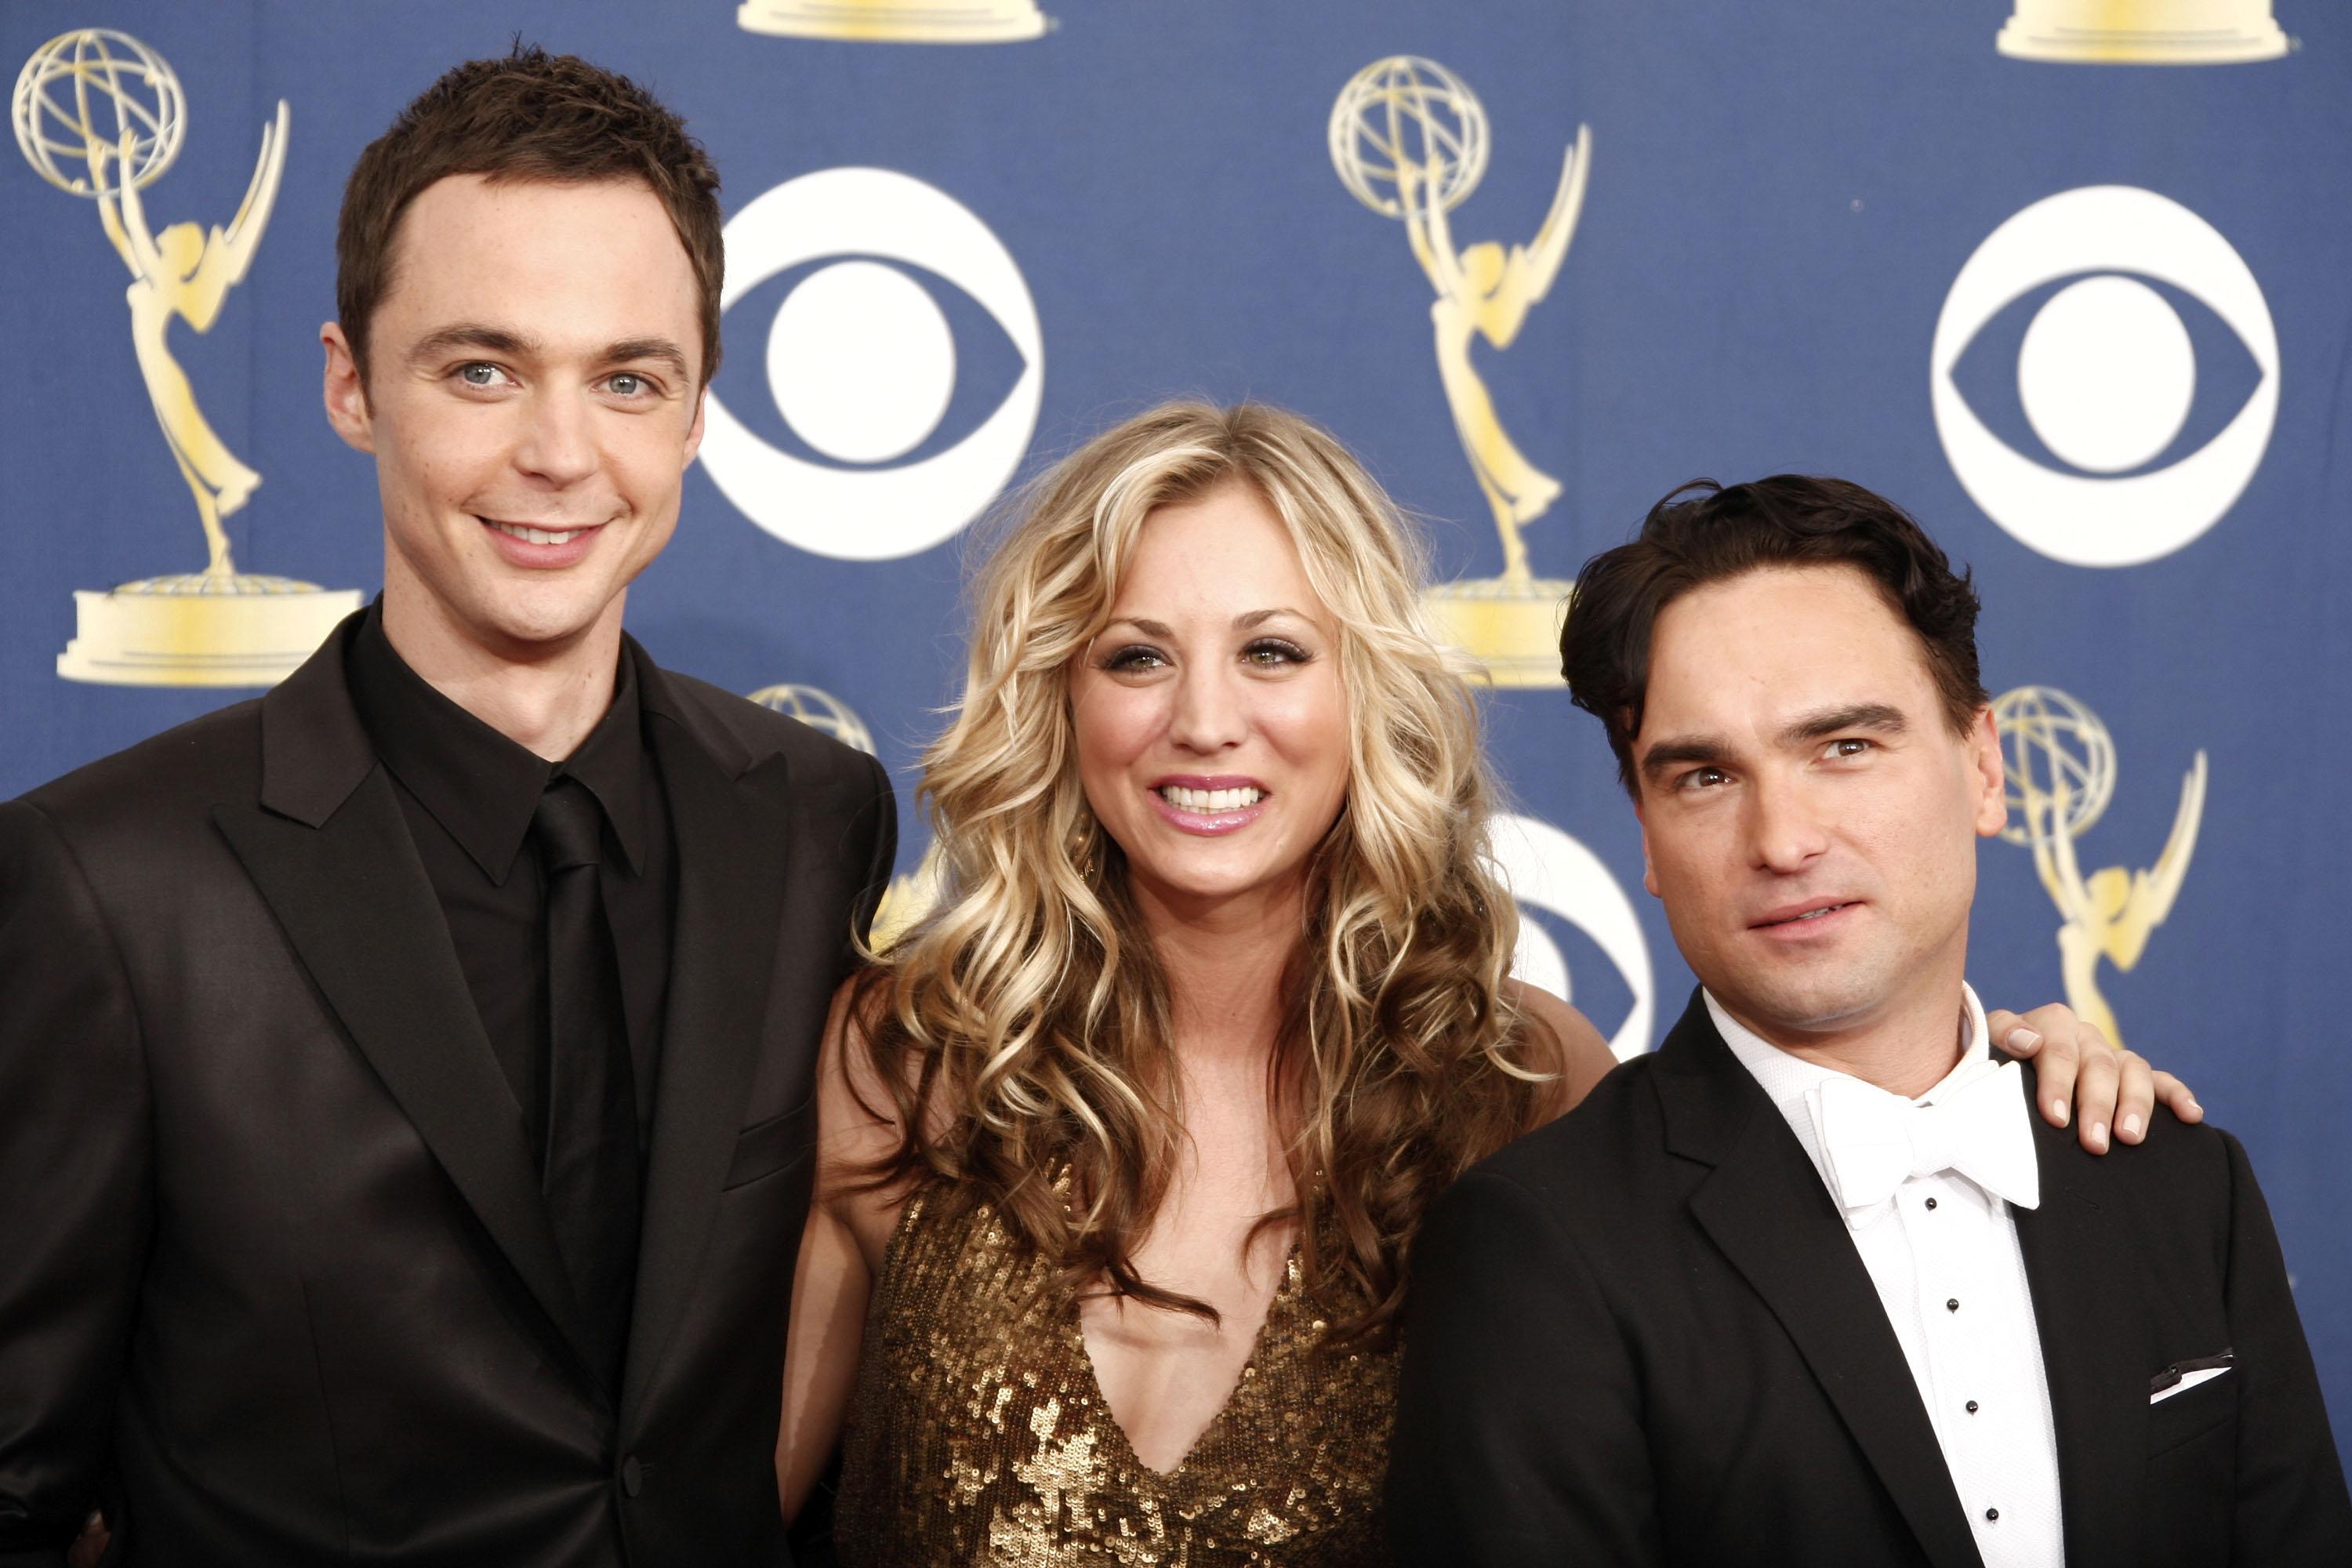 Jim Parsons, Kaley Cuoco and Johnny Galecki pose together in the press room at the 61st Primetime Emmy Awards in 2009